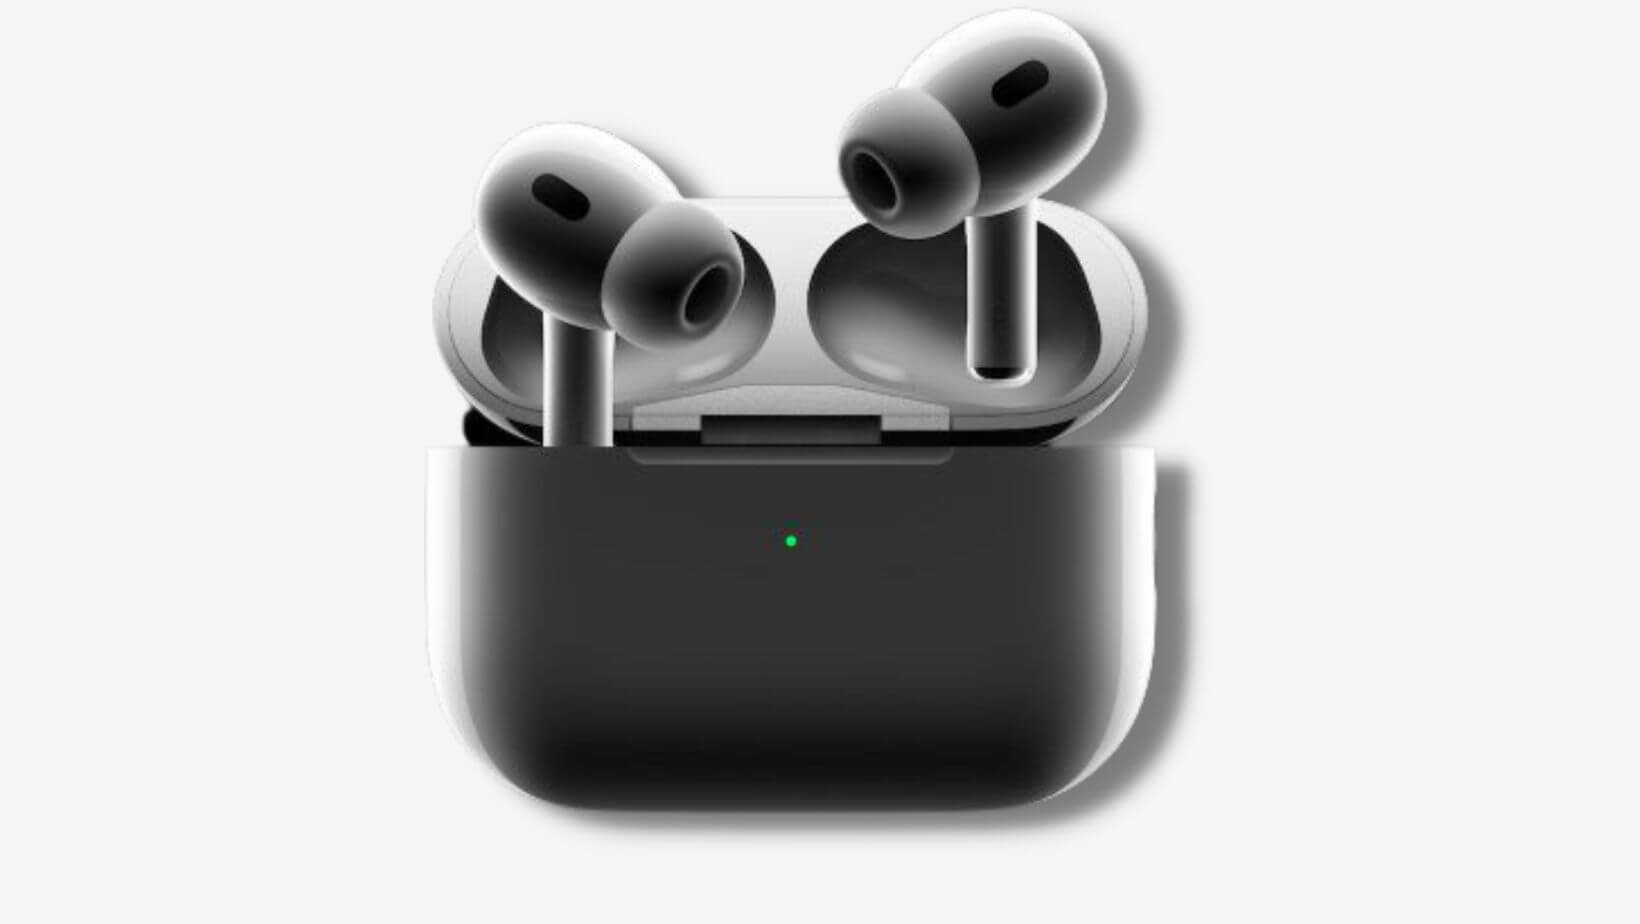 Apple’s 2nd Gen AirPods Pro: a longer listening experience better on all fronts